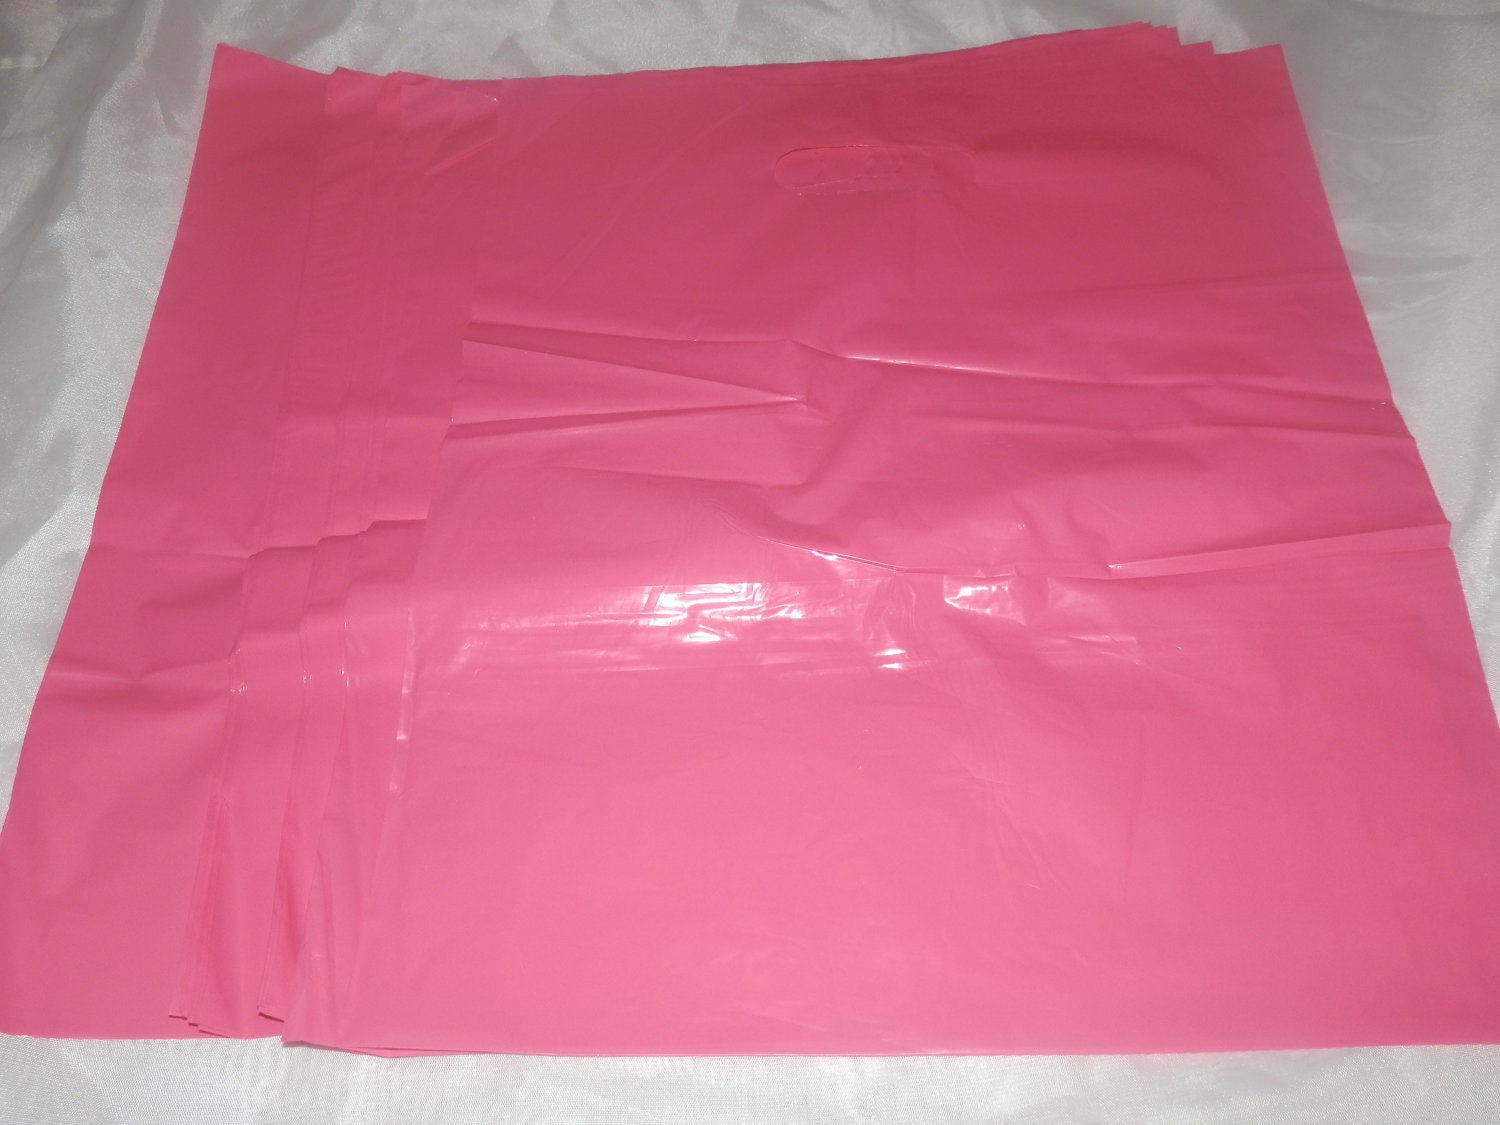 50 Glossy Pink Plastic Merchandise Bags size 12x15 Handle Retail Gift Bags wholesale lot